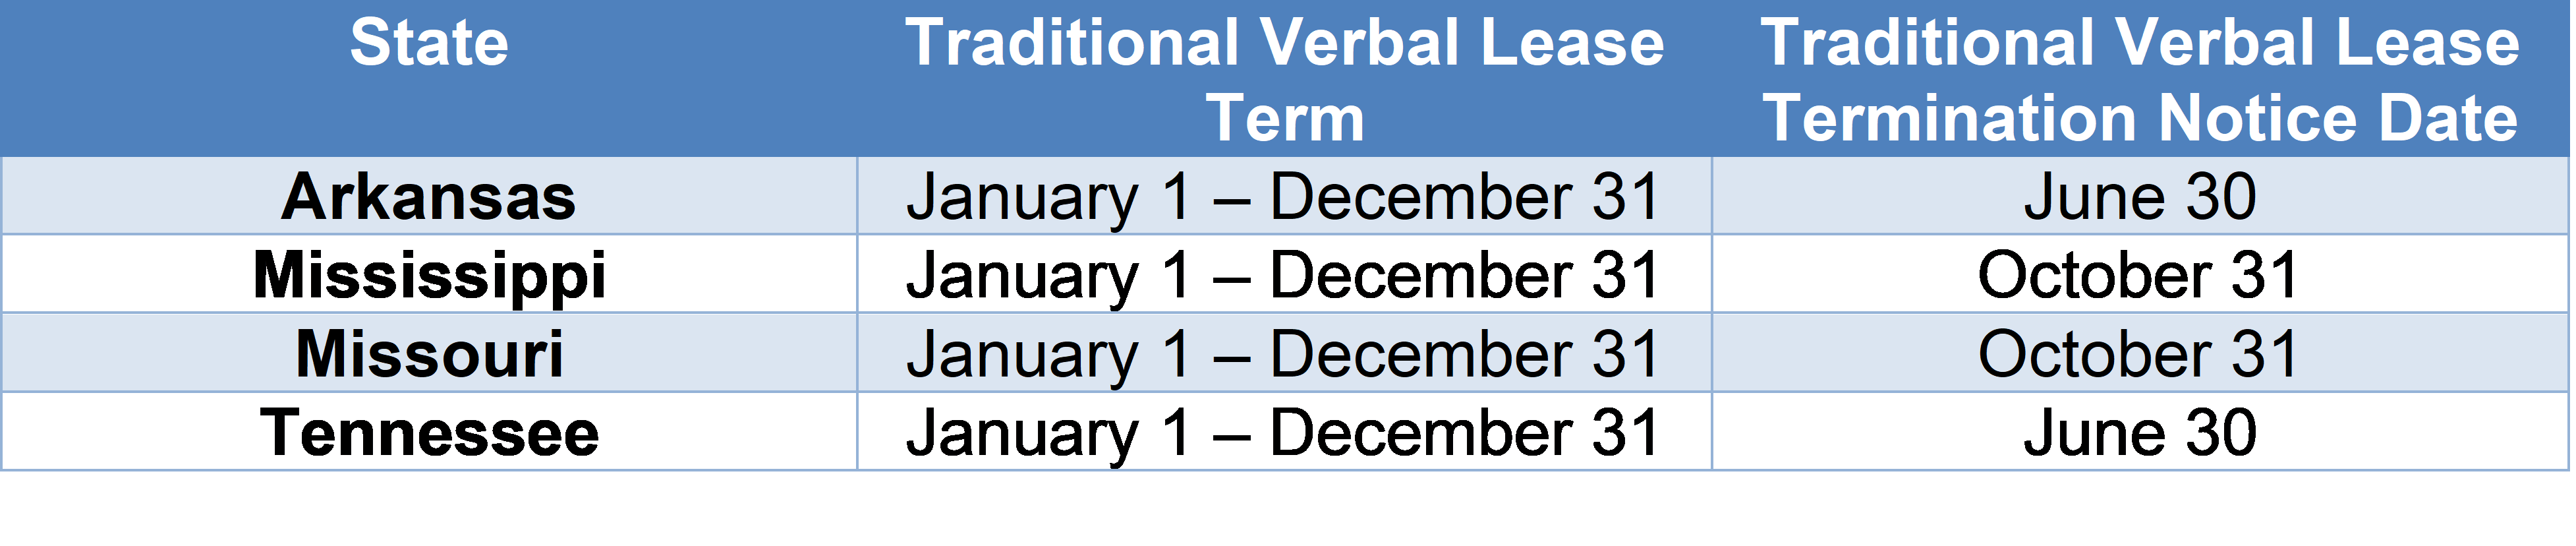 Verbal Lease Terminations Dates